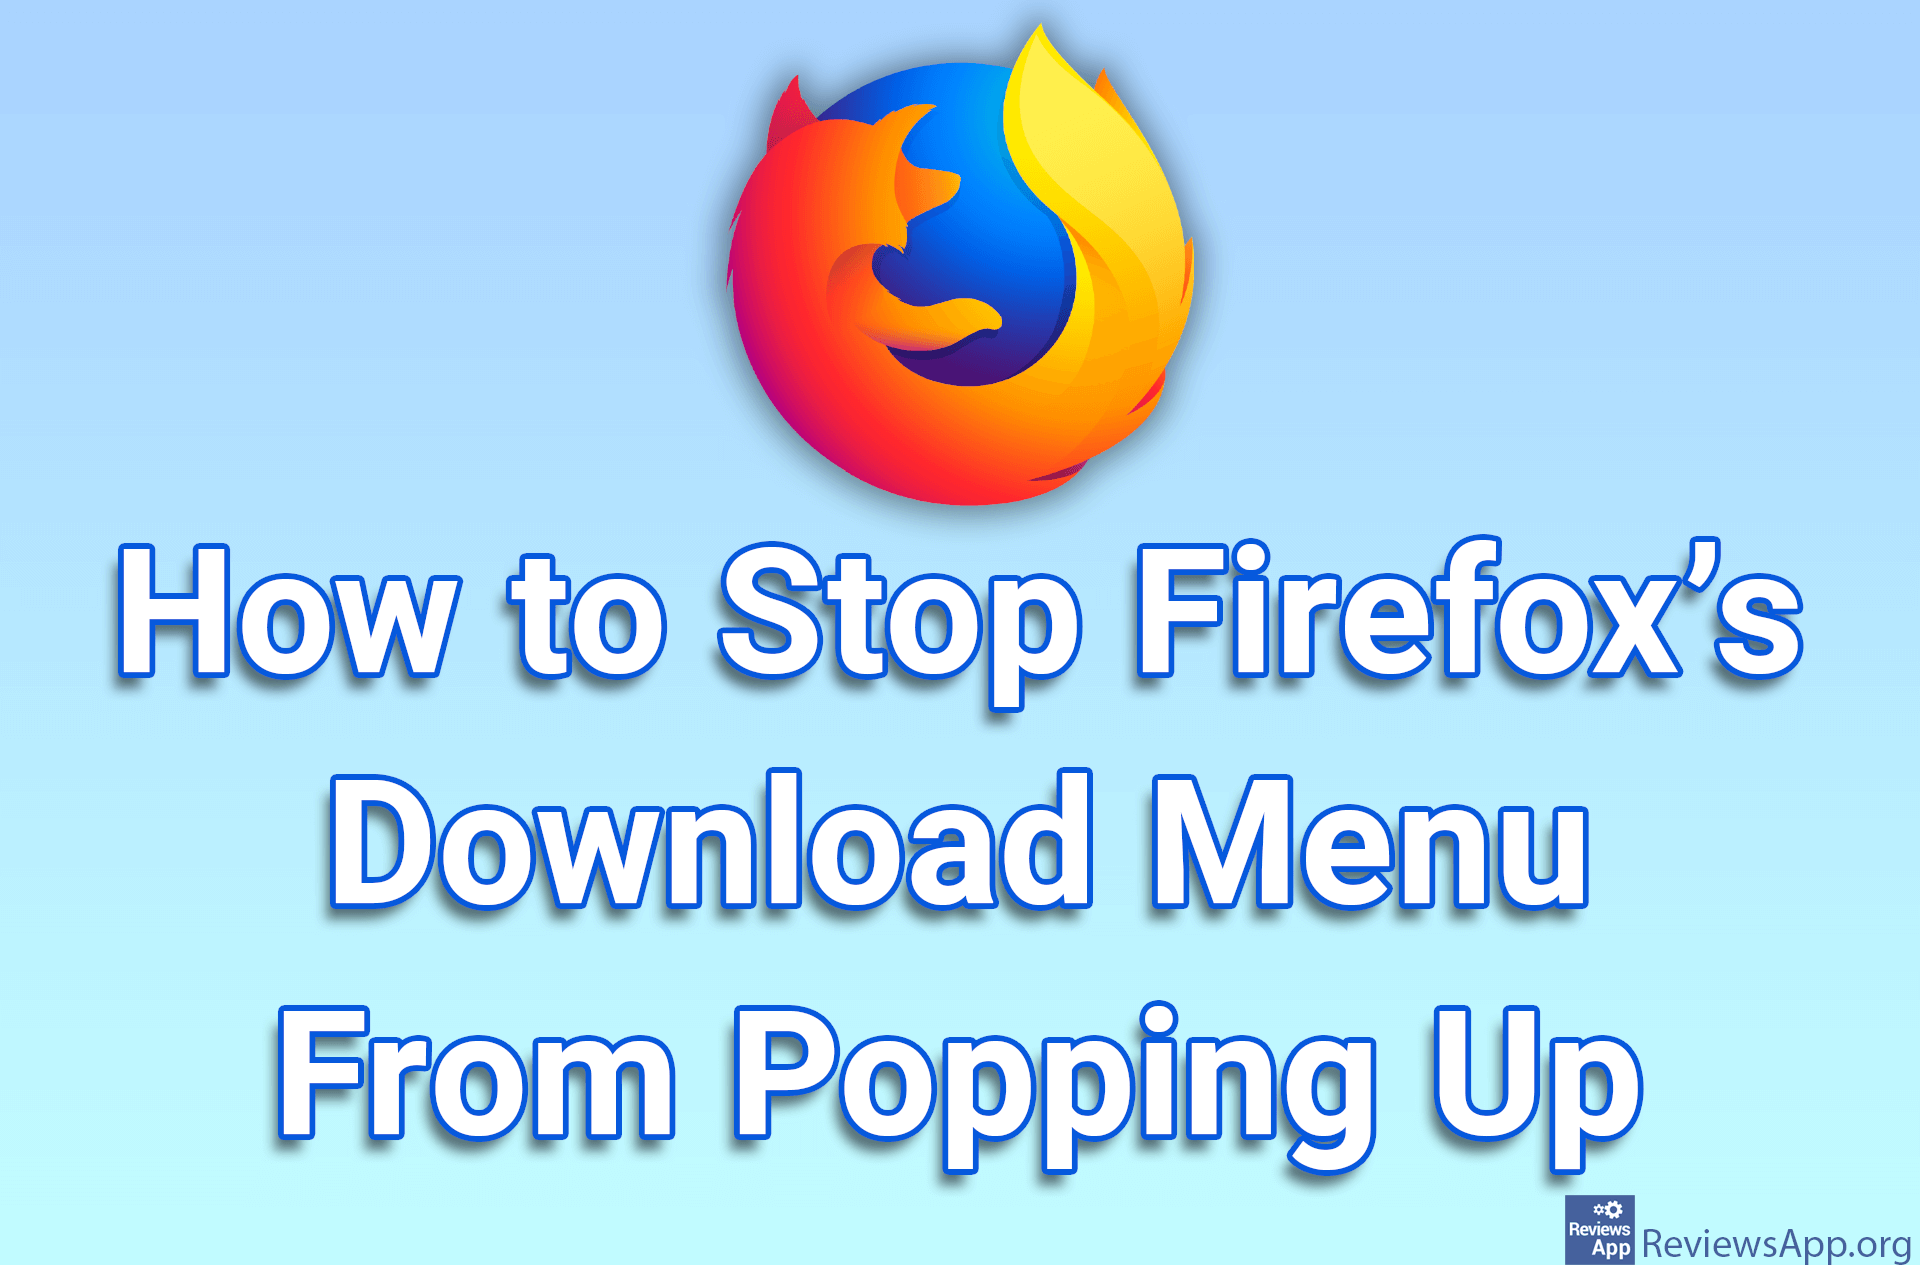 How to Stop Firefox’s Download Menu From Popping Up